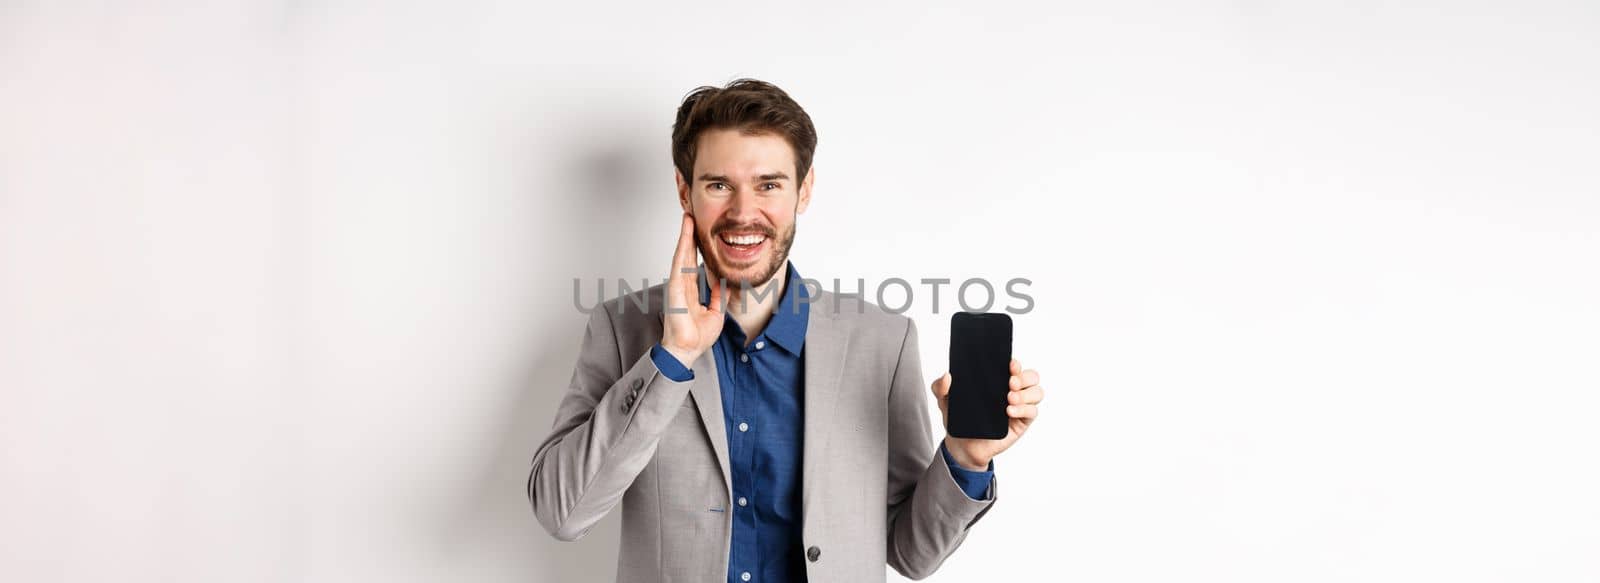 E-commerce and online shopping concept. Happy bearded guy in suit showing empty smartphone screen and laughing, standing on white background.